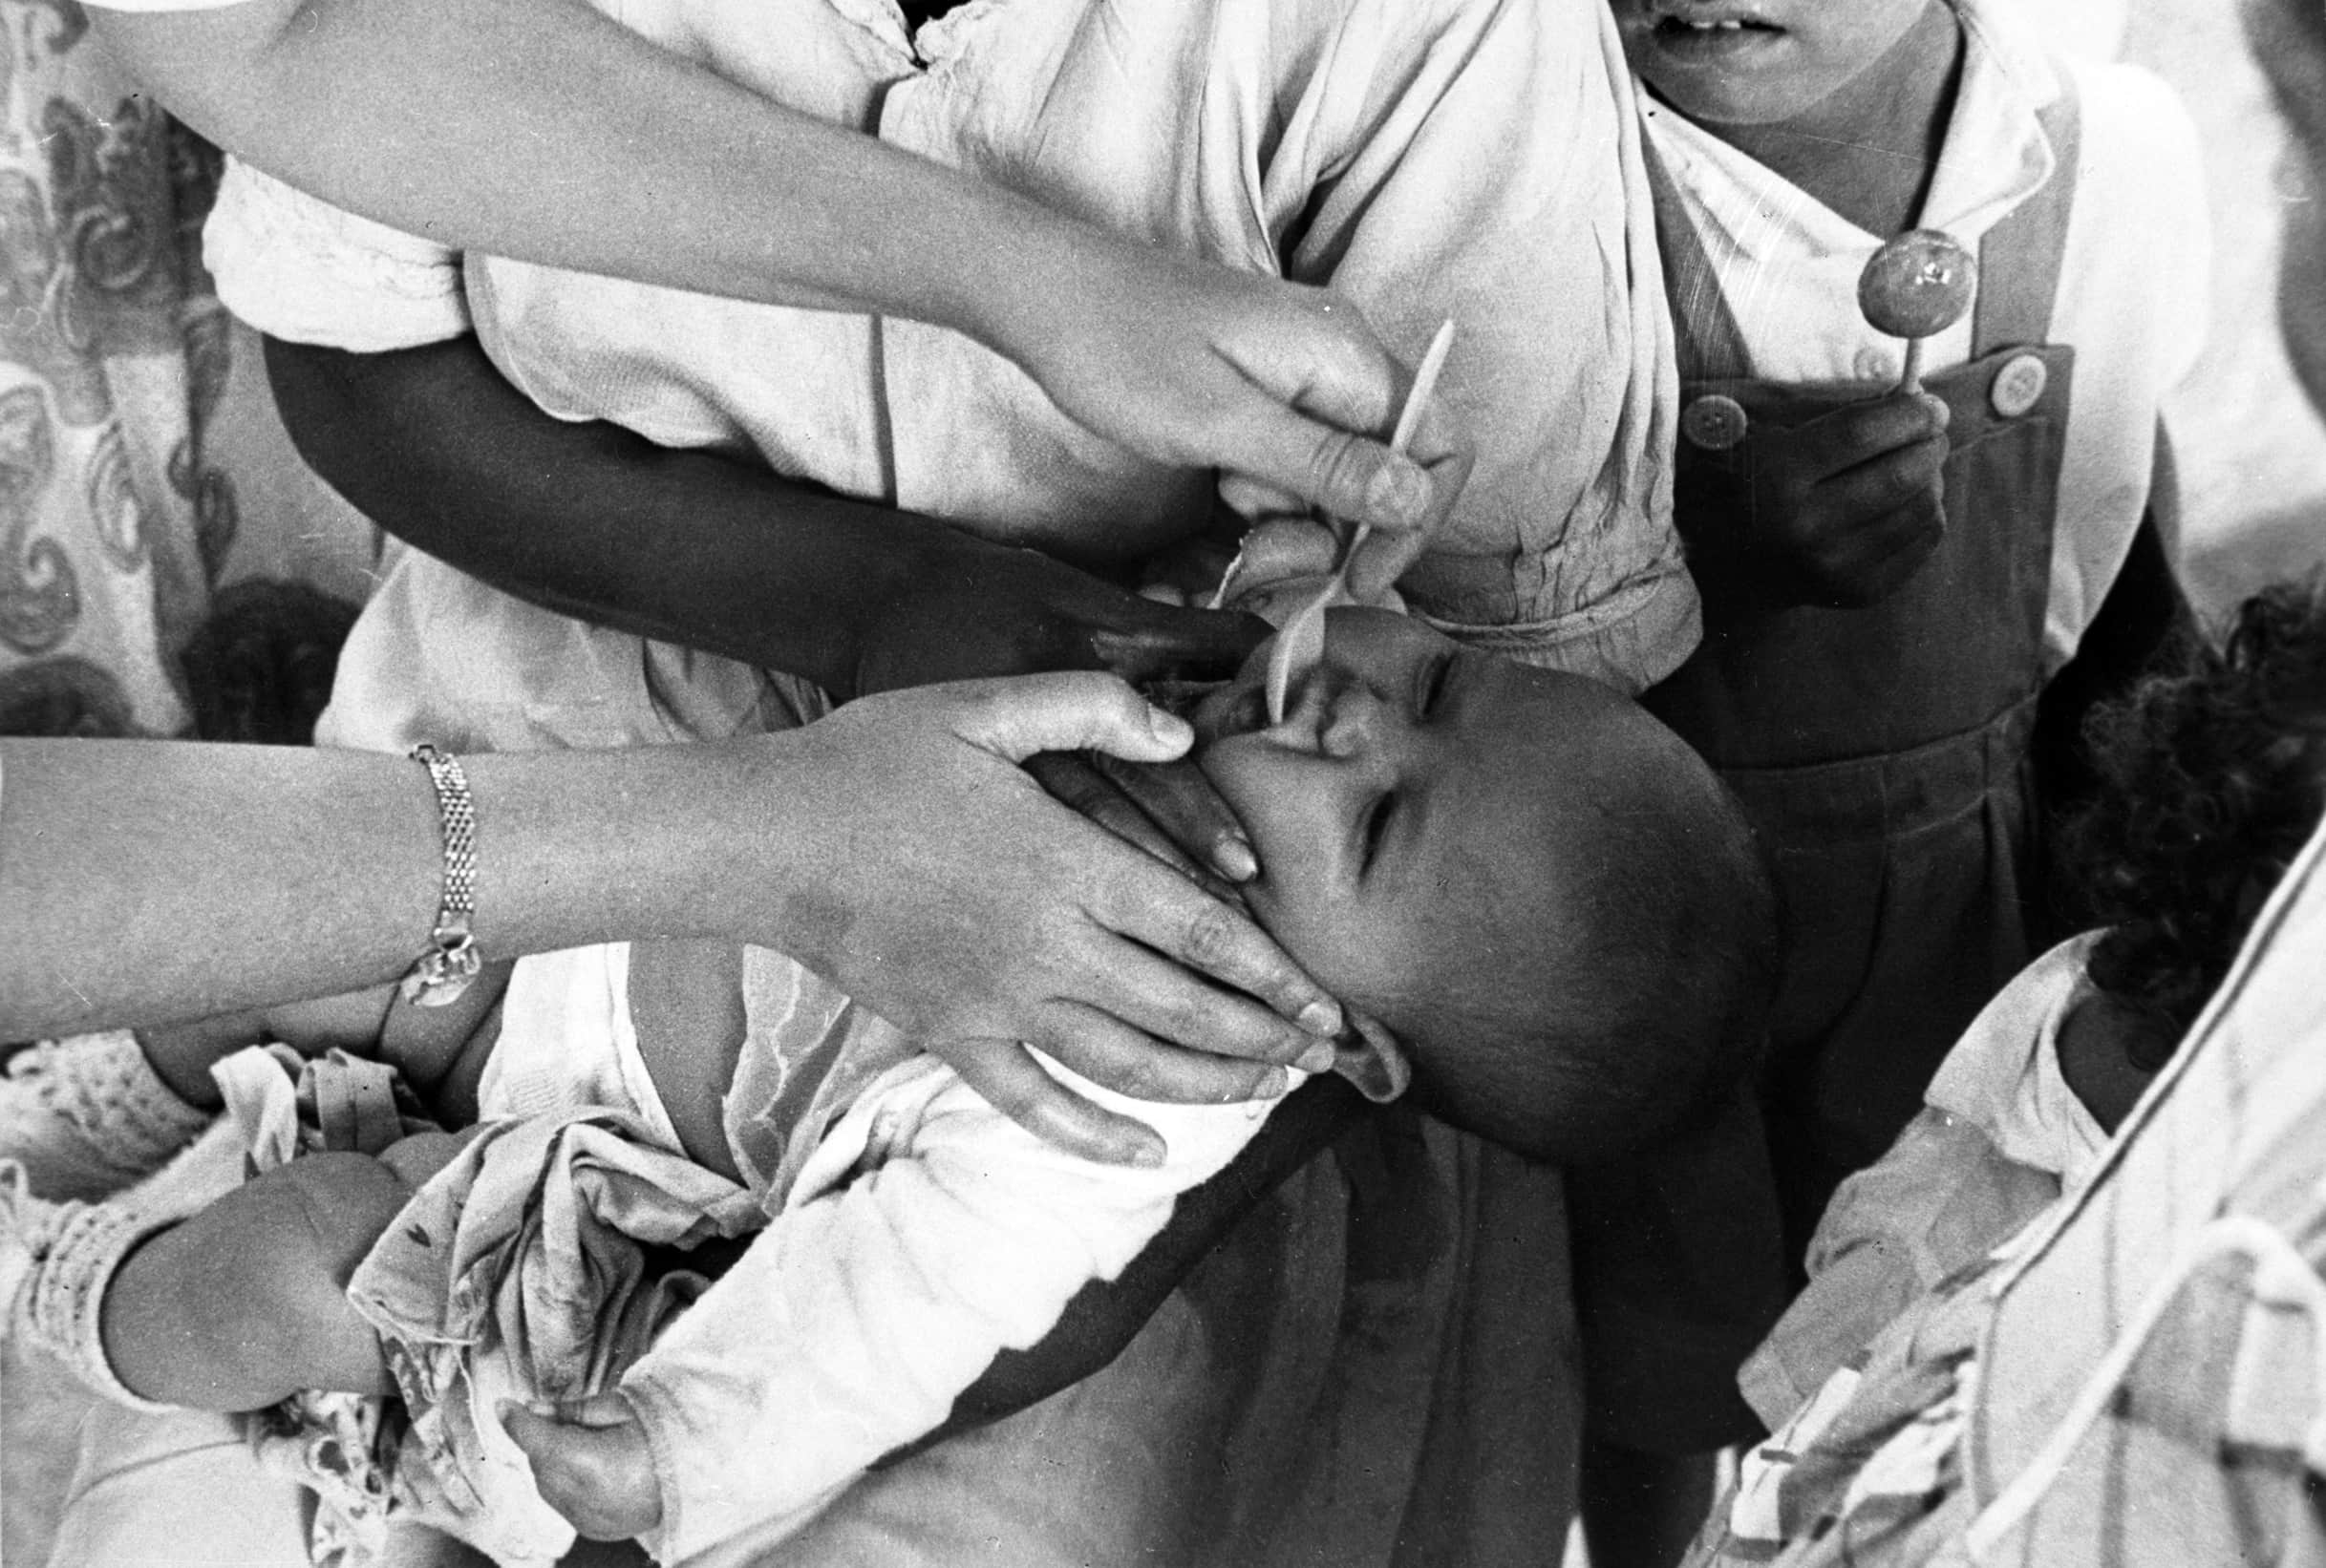 Colombia 1958: the live poliovirus syrup vaccine being administrated to a young child